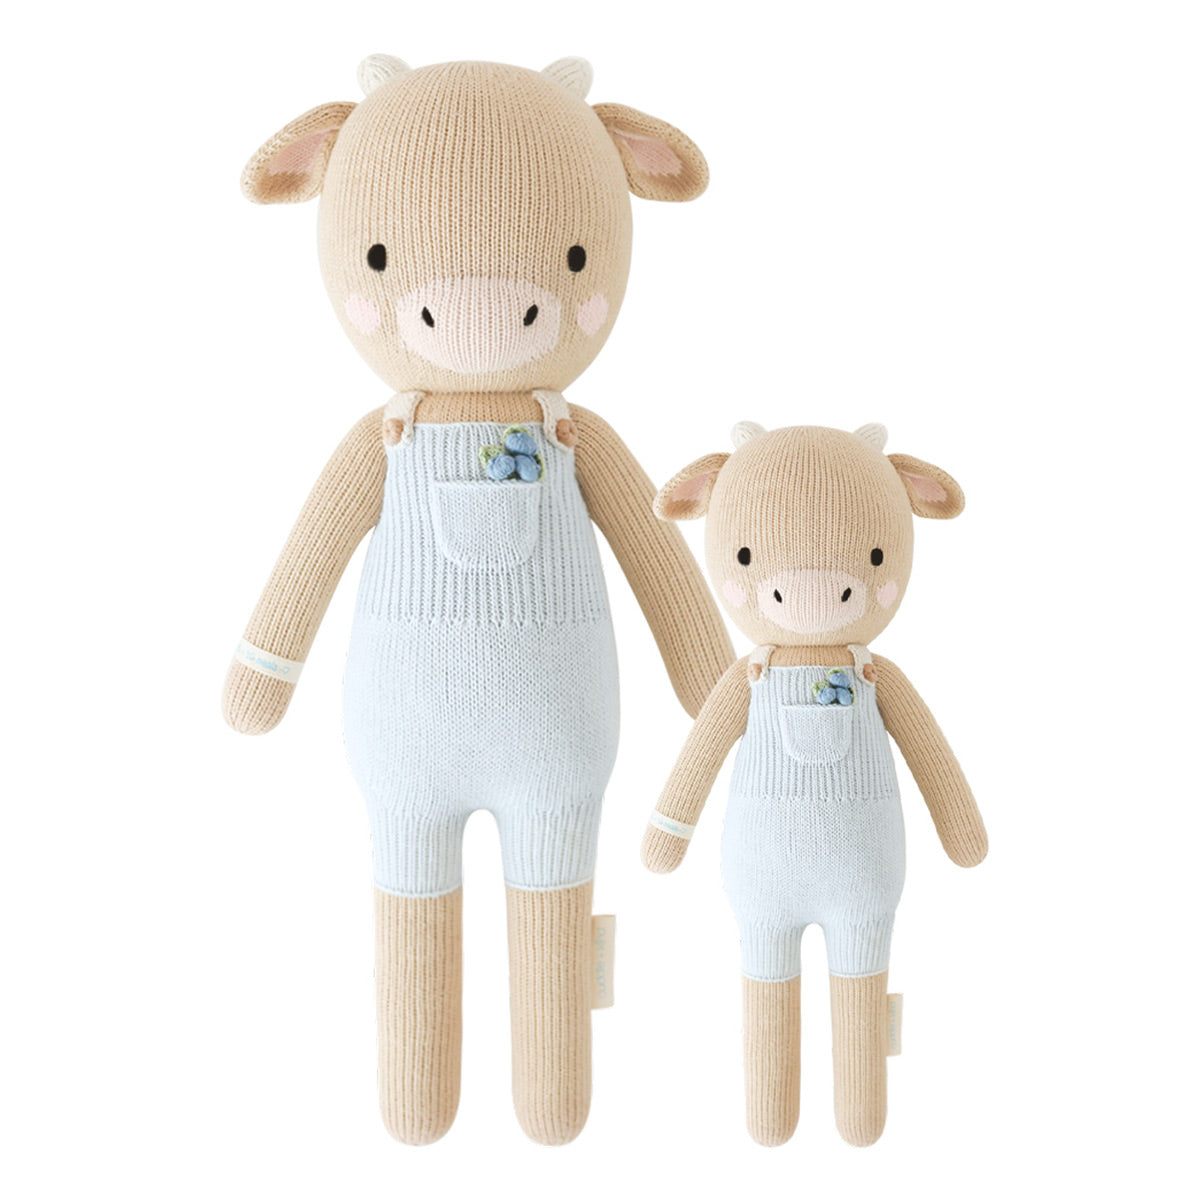 Cuddle + Kind Hand-Knit Doll - Asher the Cow